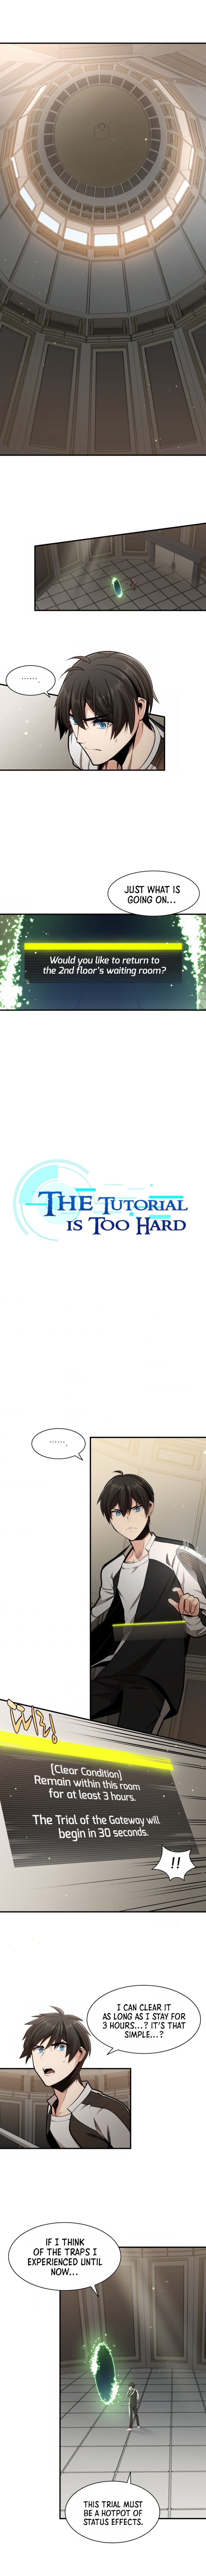 the_tutorial_is_too_hard_15_1